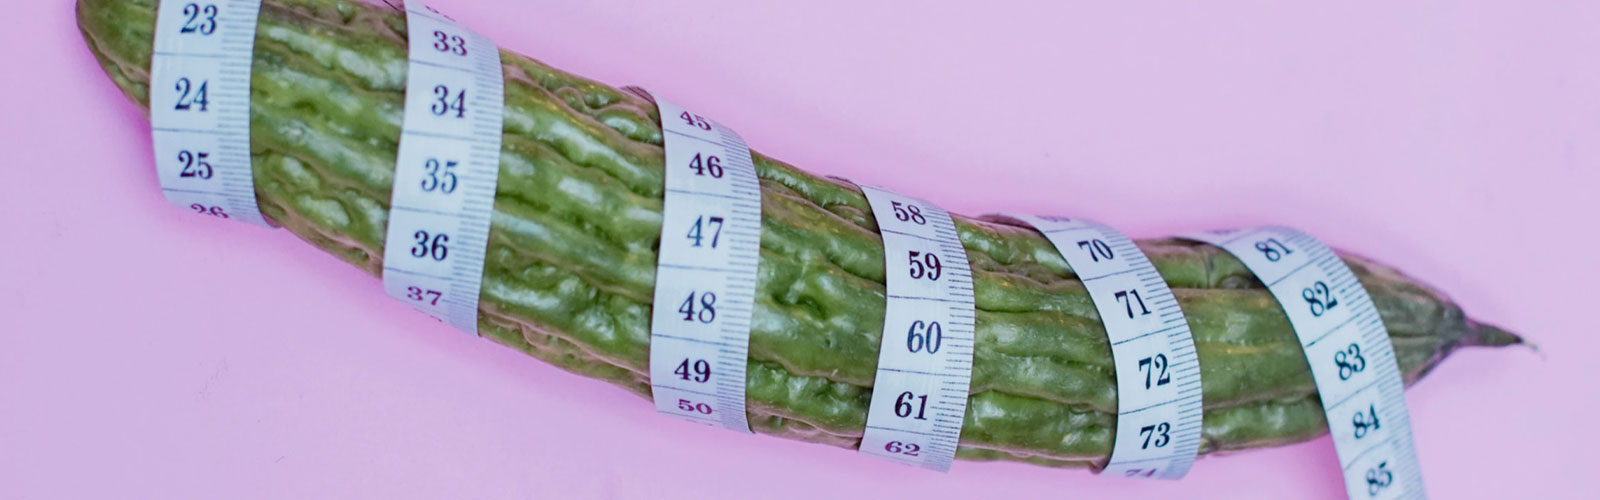 Tape measure wrapped around cucumber